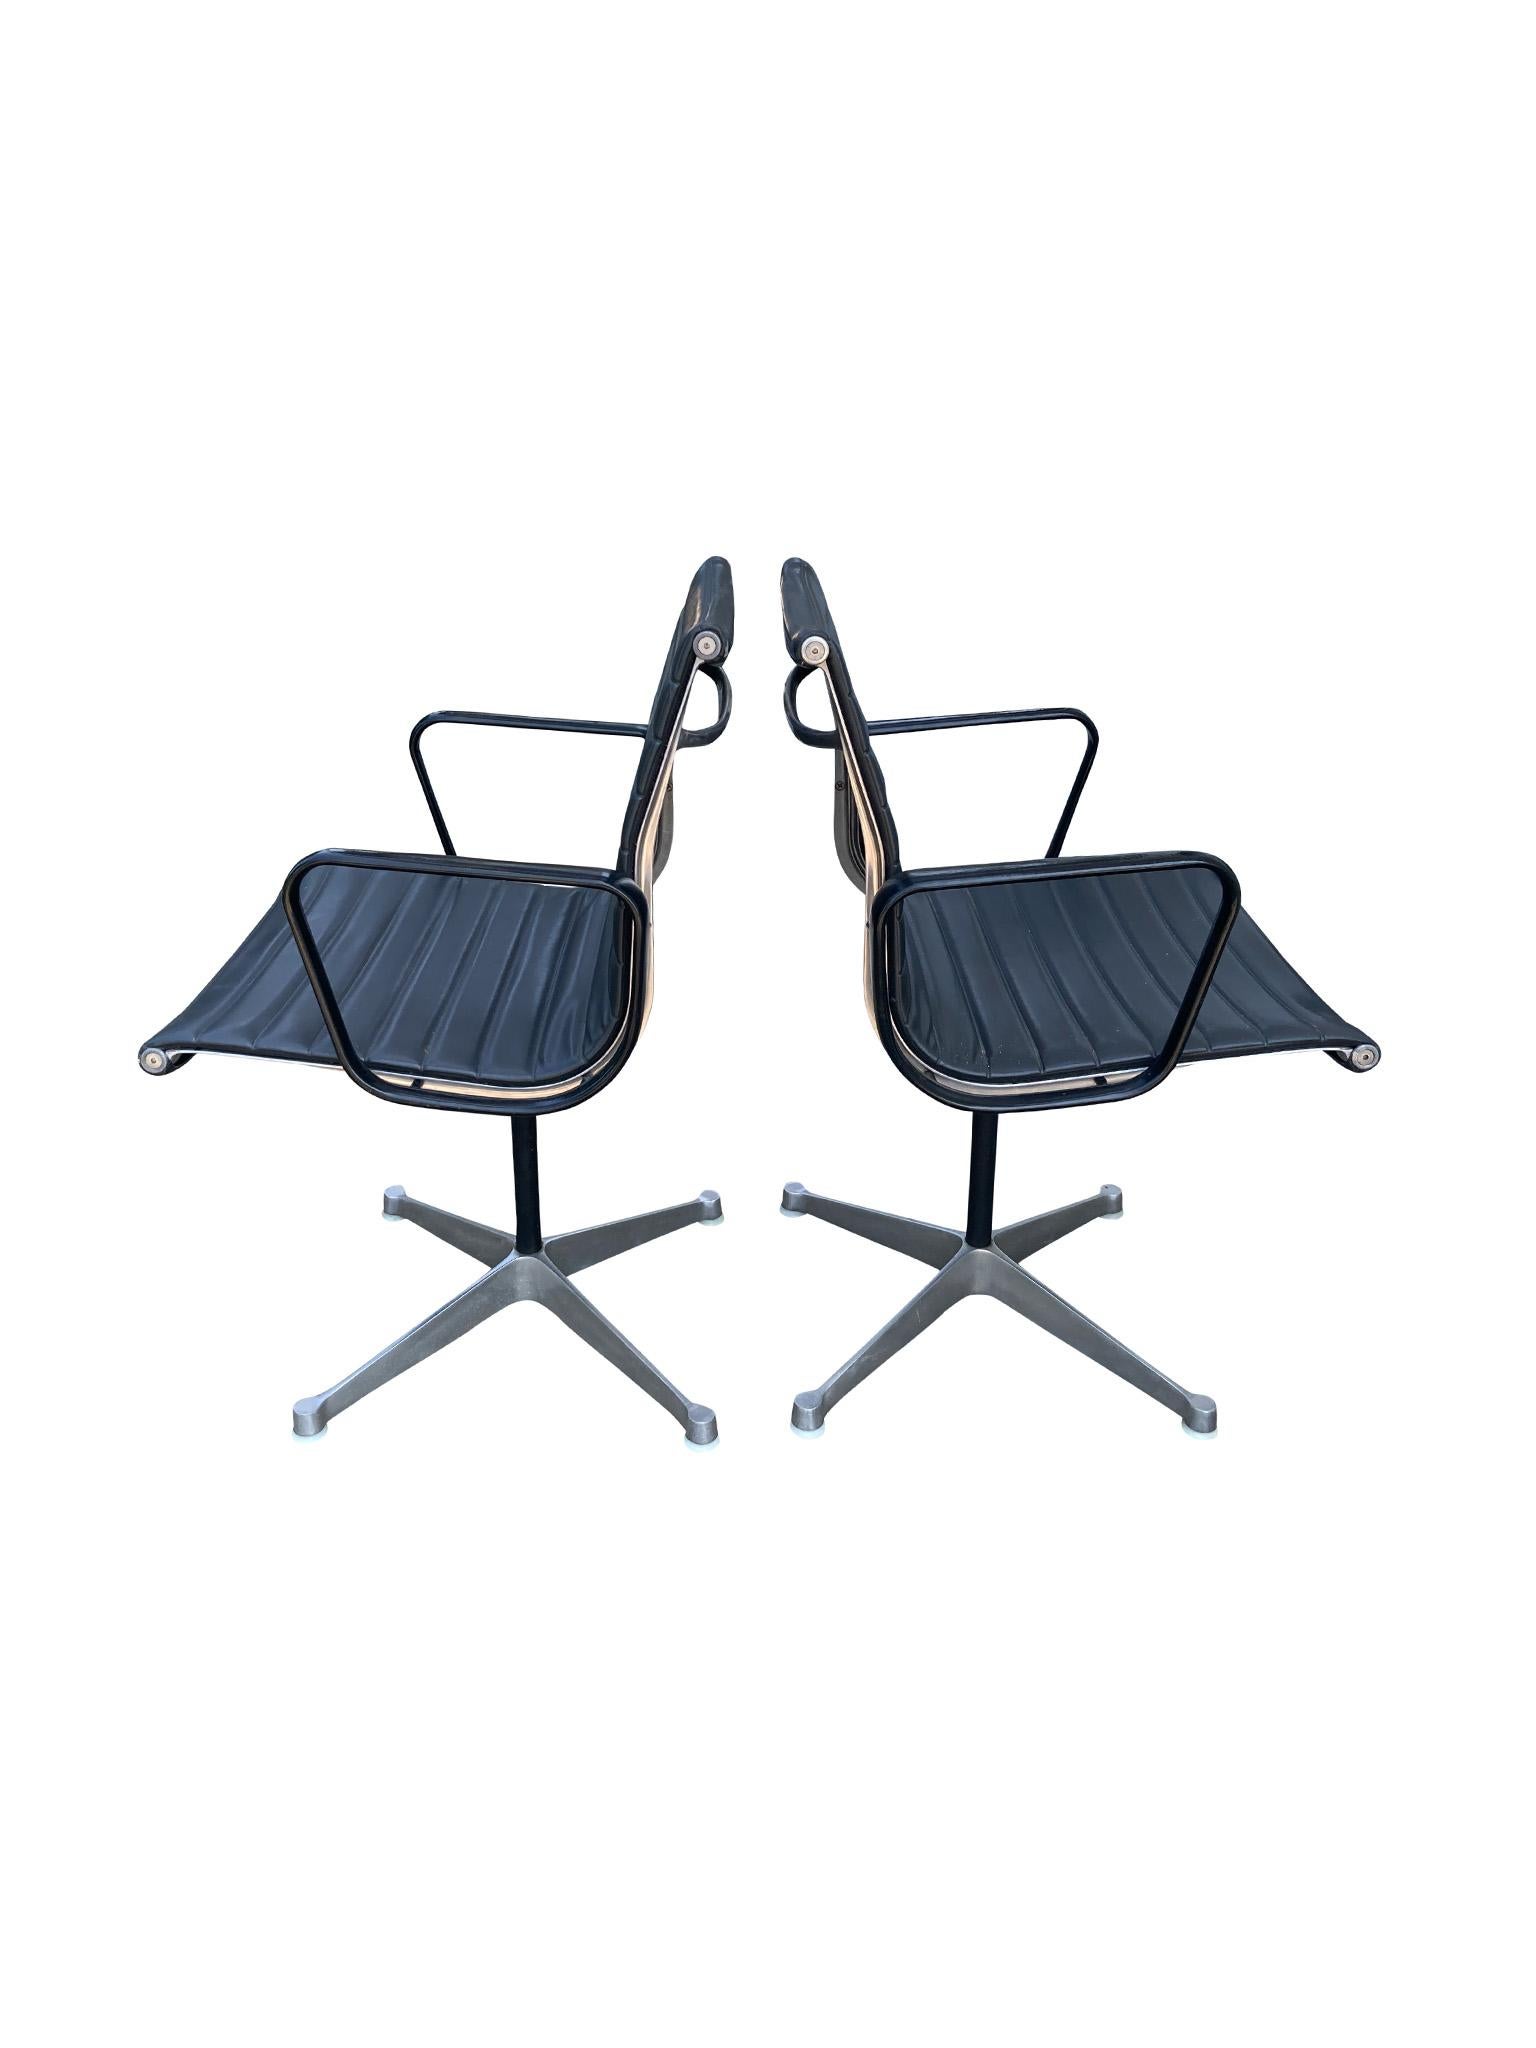 American Set of 4 Eames Aluminum Group Black Leather Arm Chairs for Herman Miller